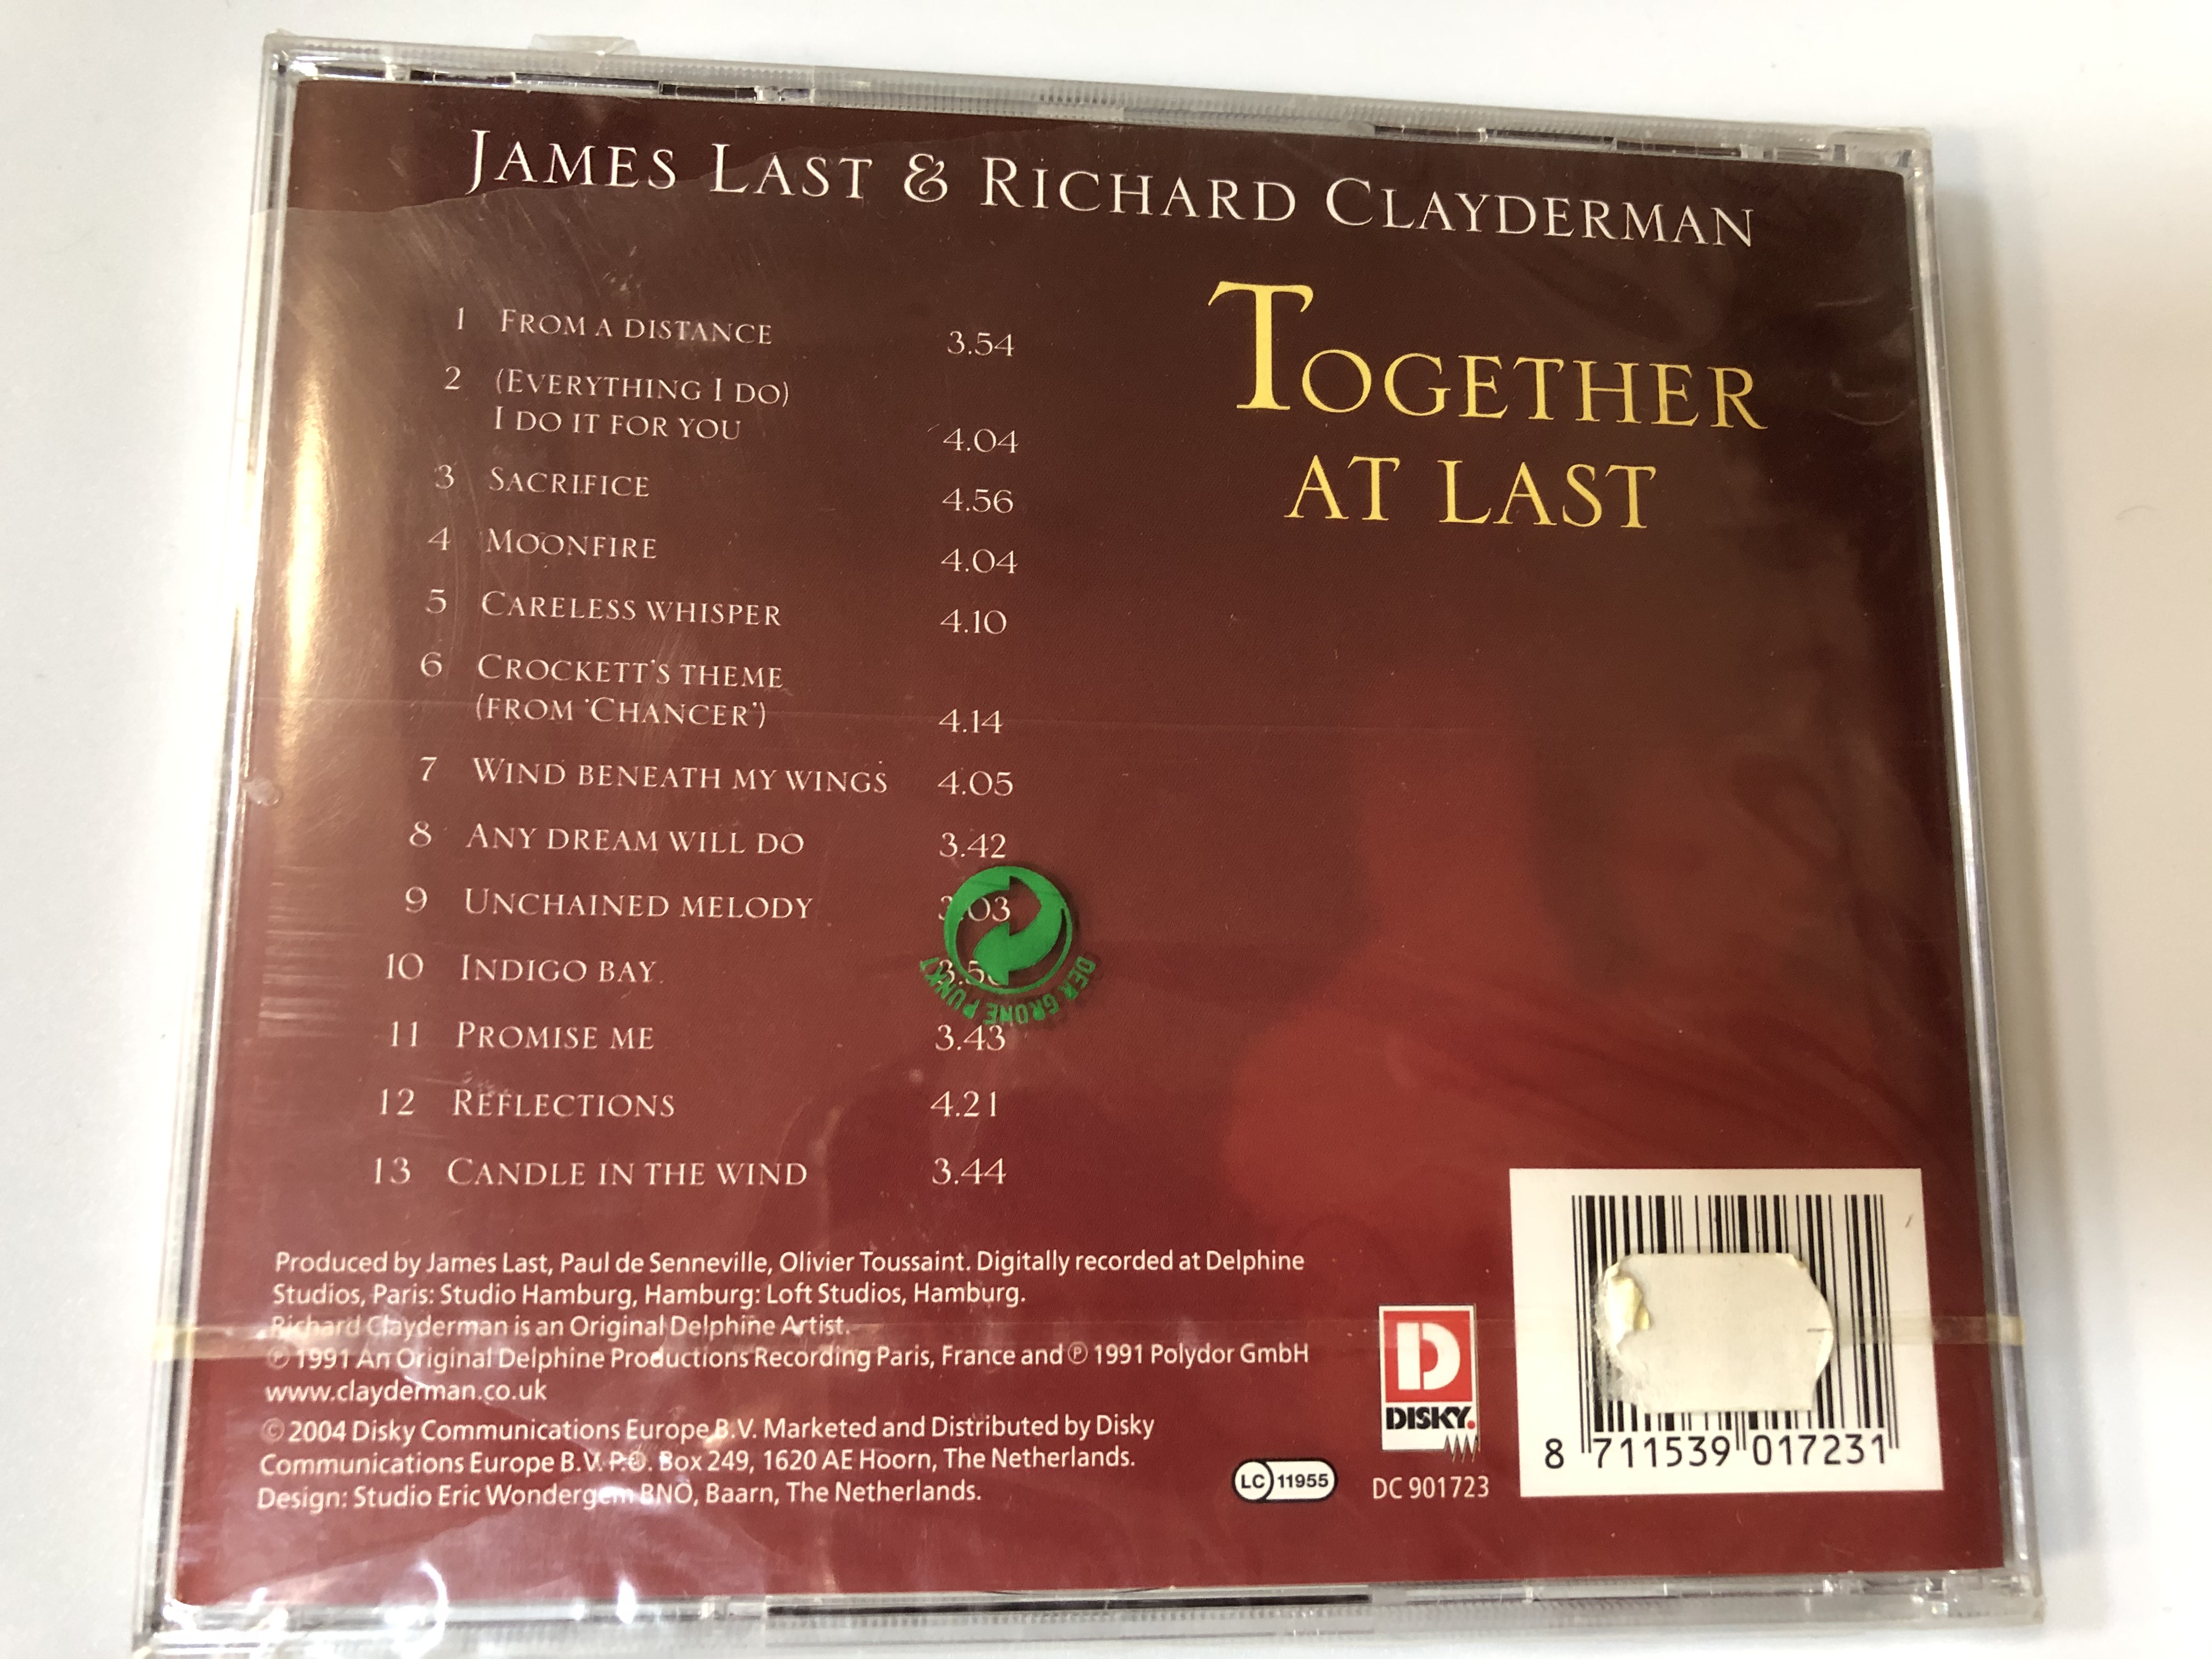 james-last-richard-clayderman-together-at-last-from-a-distance-careless-whisper-unchained-melody-candle-in-the-wind-everything-i-do-i-do-it-for-you-disky-audio-cd-2004-dc-9017.jpg